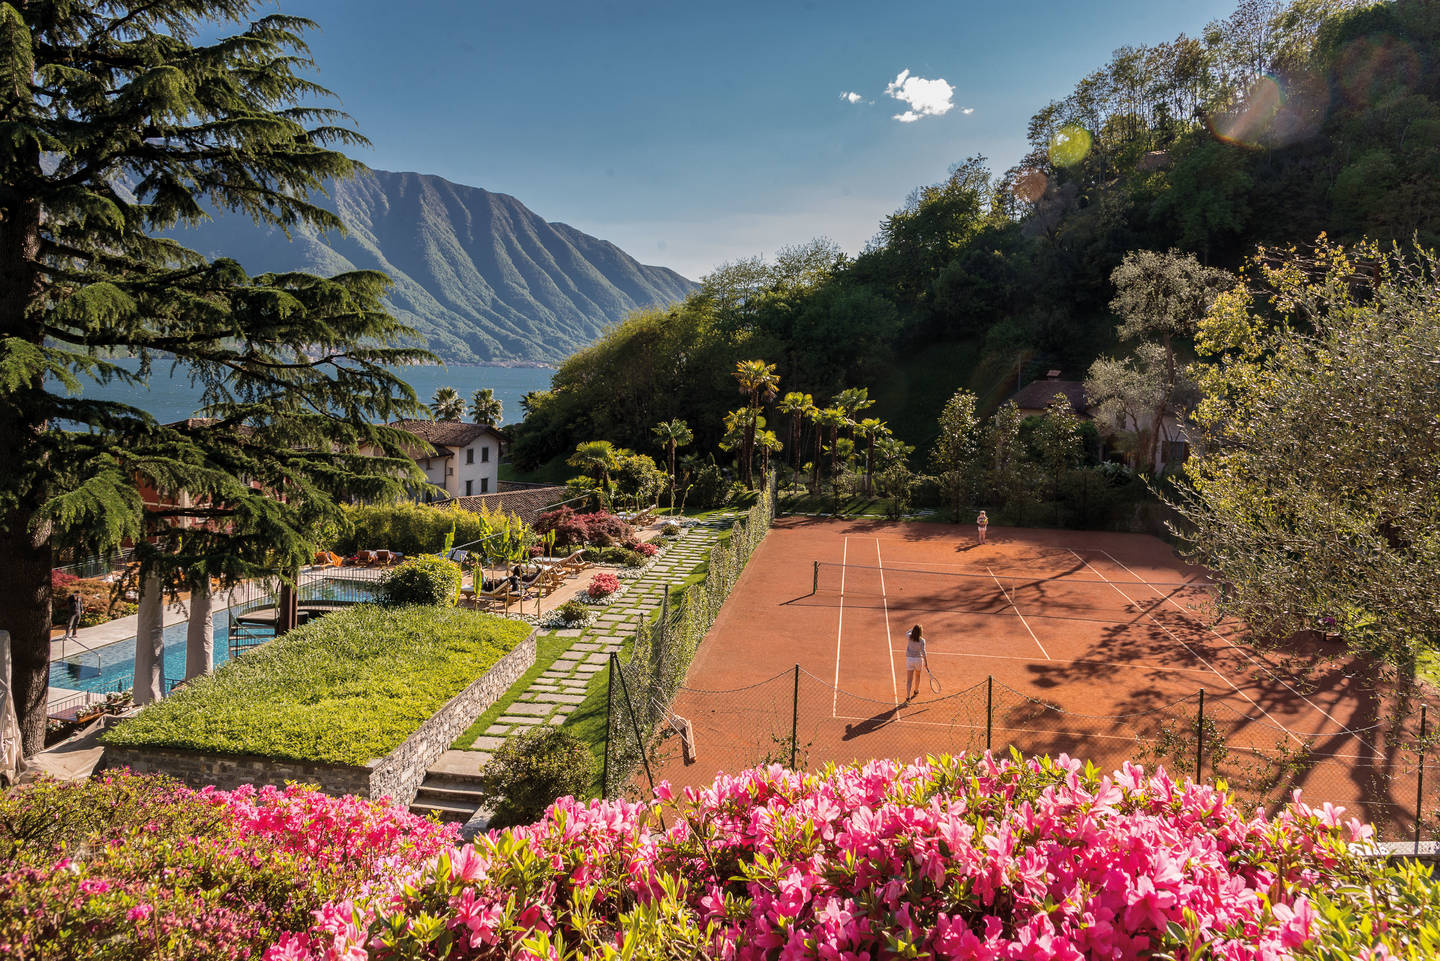 Discover the Grand Hotel Tremezzo’s century-long legacy on the shores of Lake Como